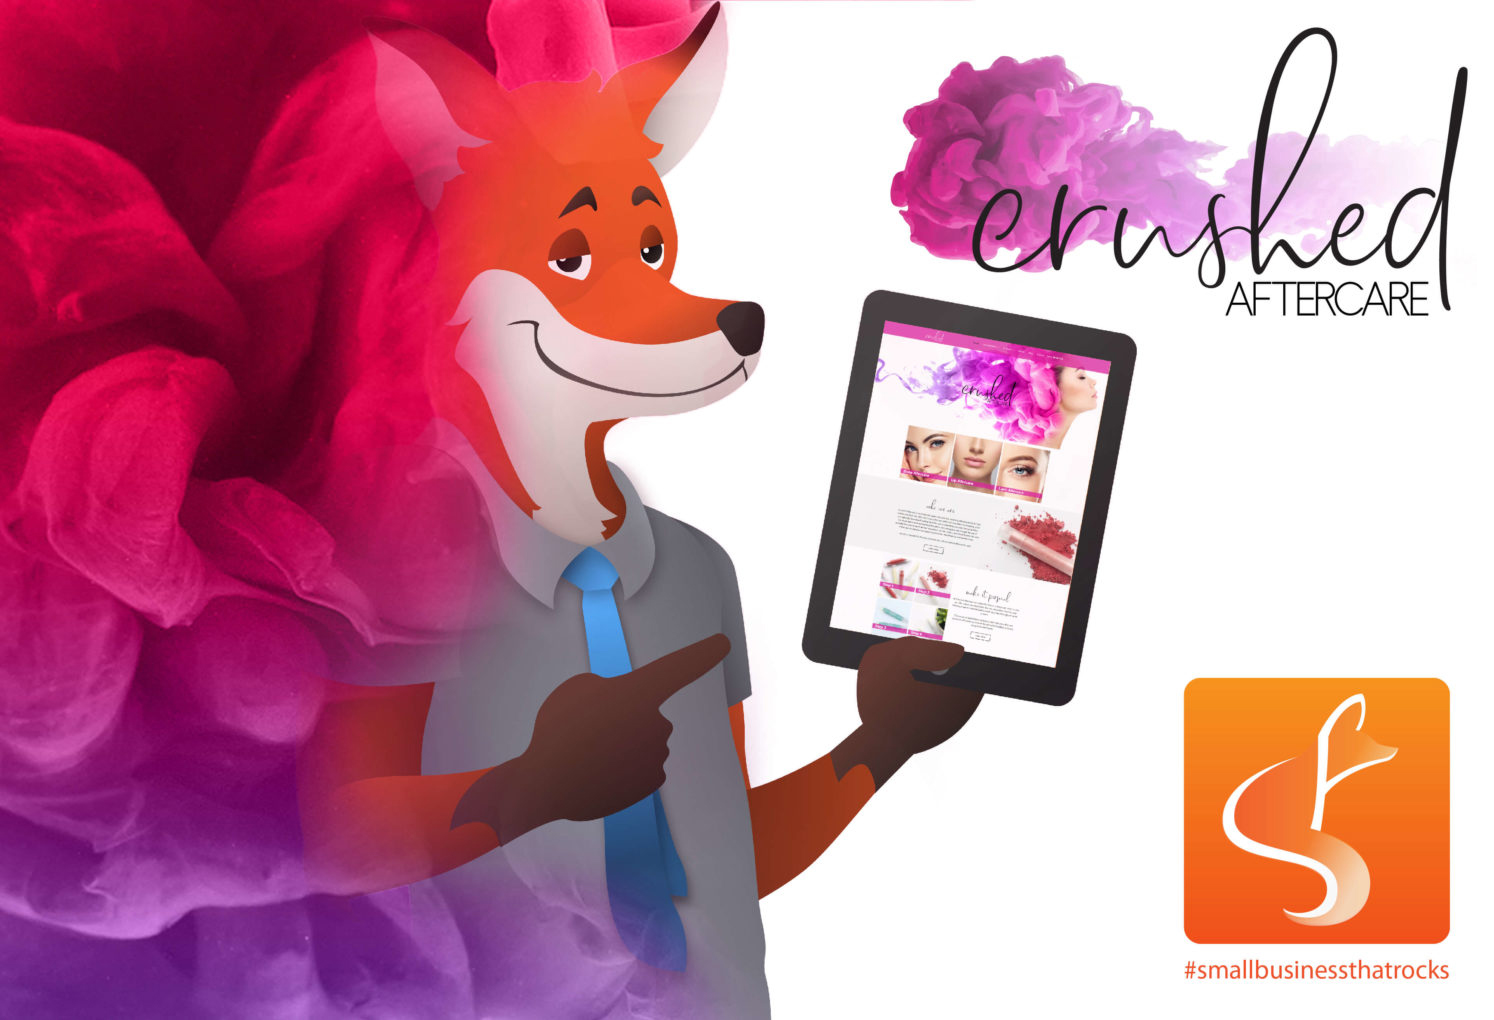 crushed aftercare feature sly fox small business that rocks - SlyFox Web Design and Marketing